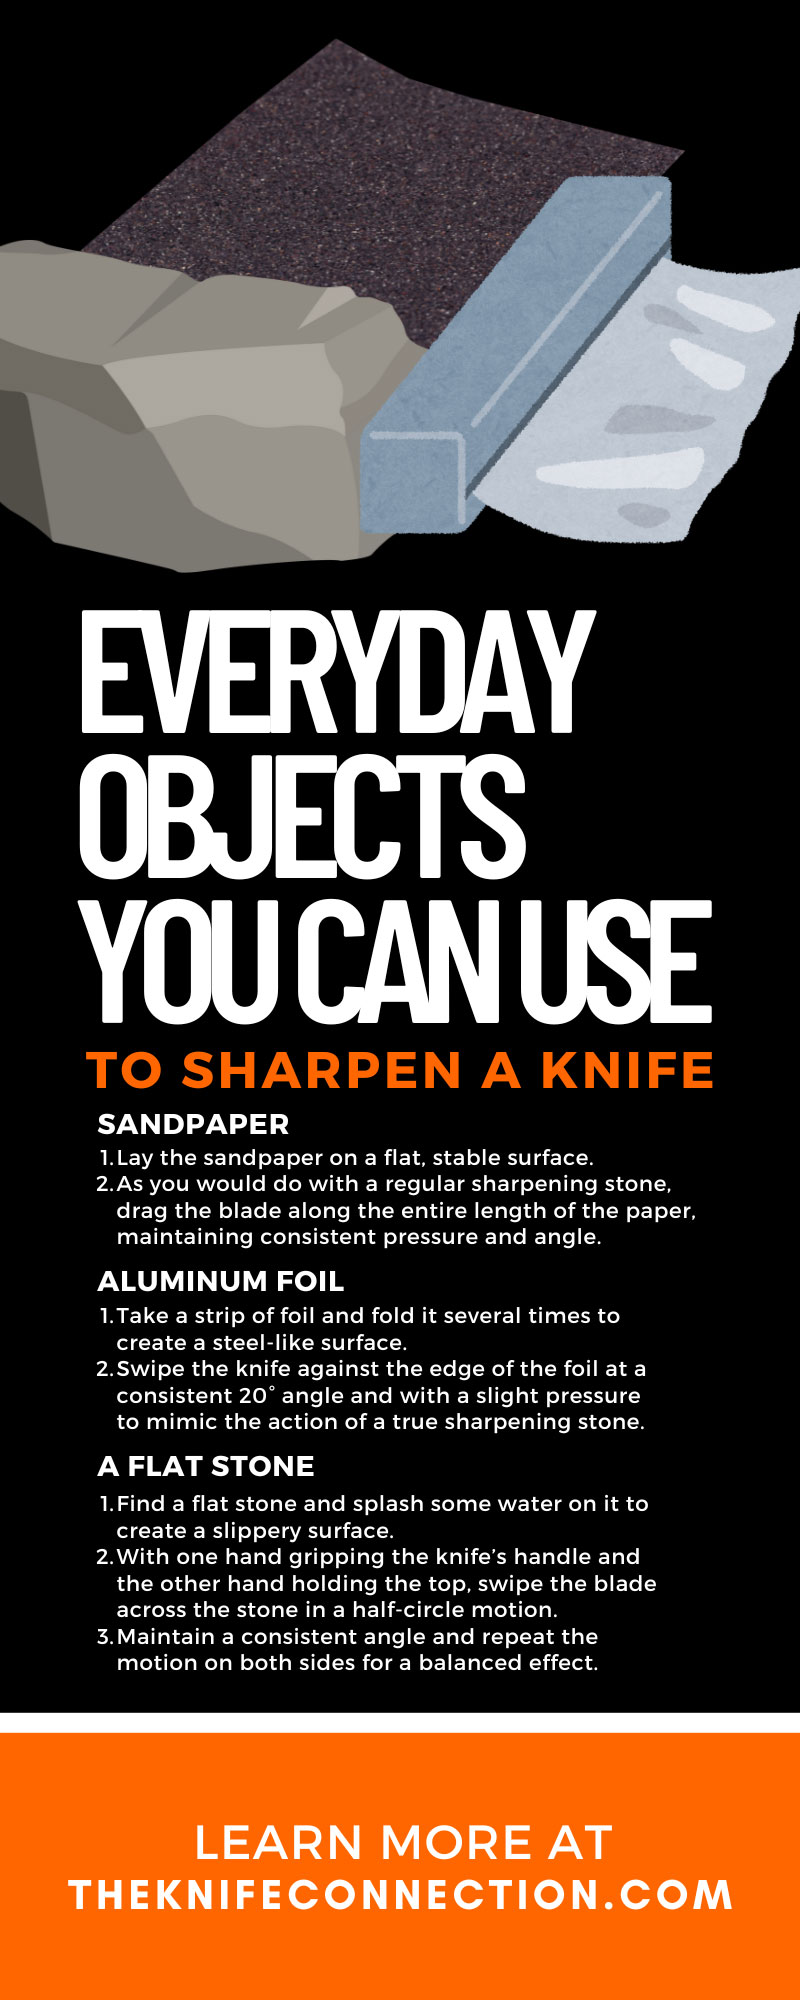 Everyday Objects You Can Use To Sharpen a Knife